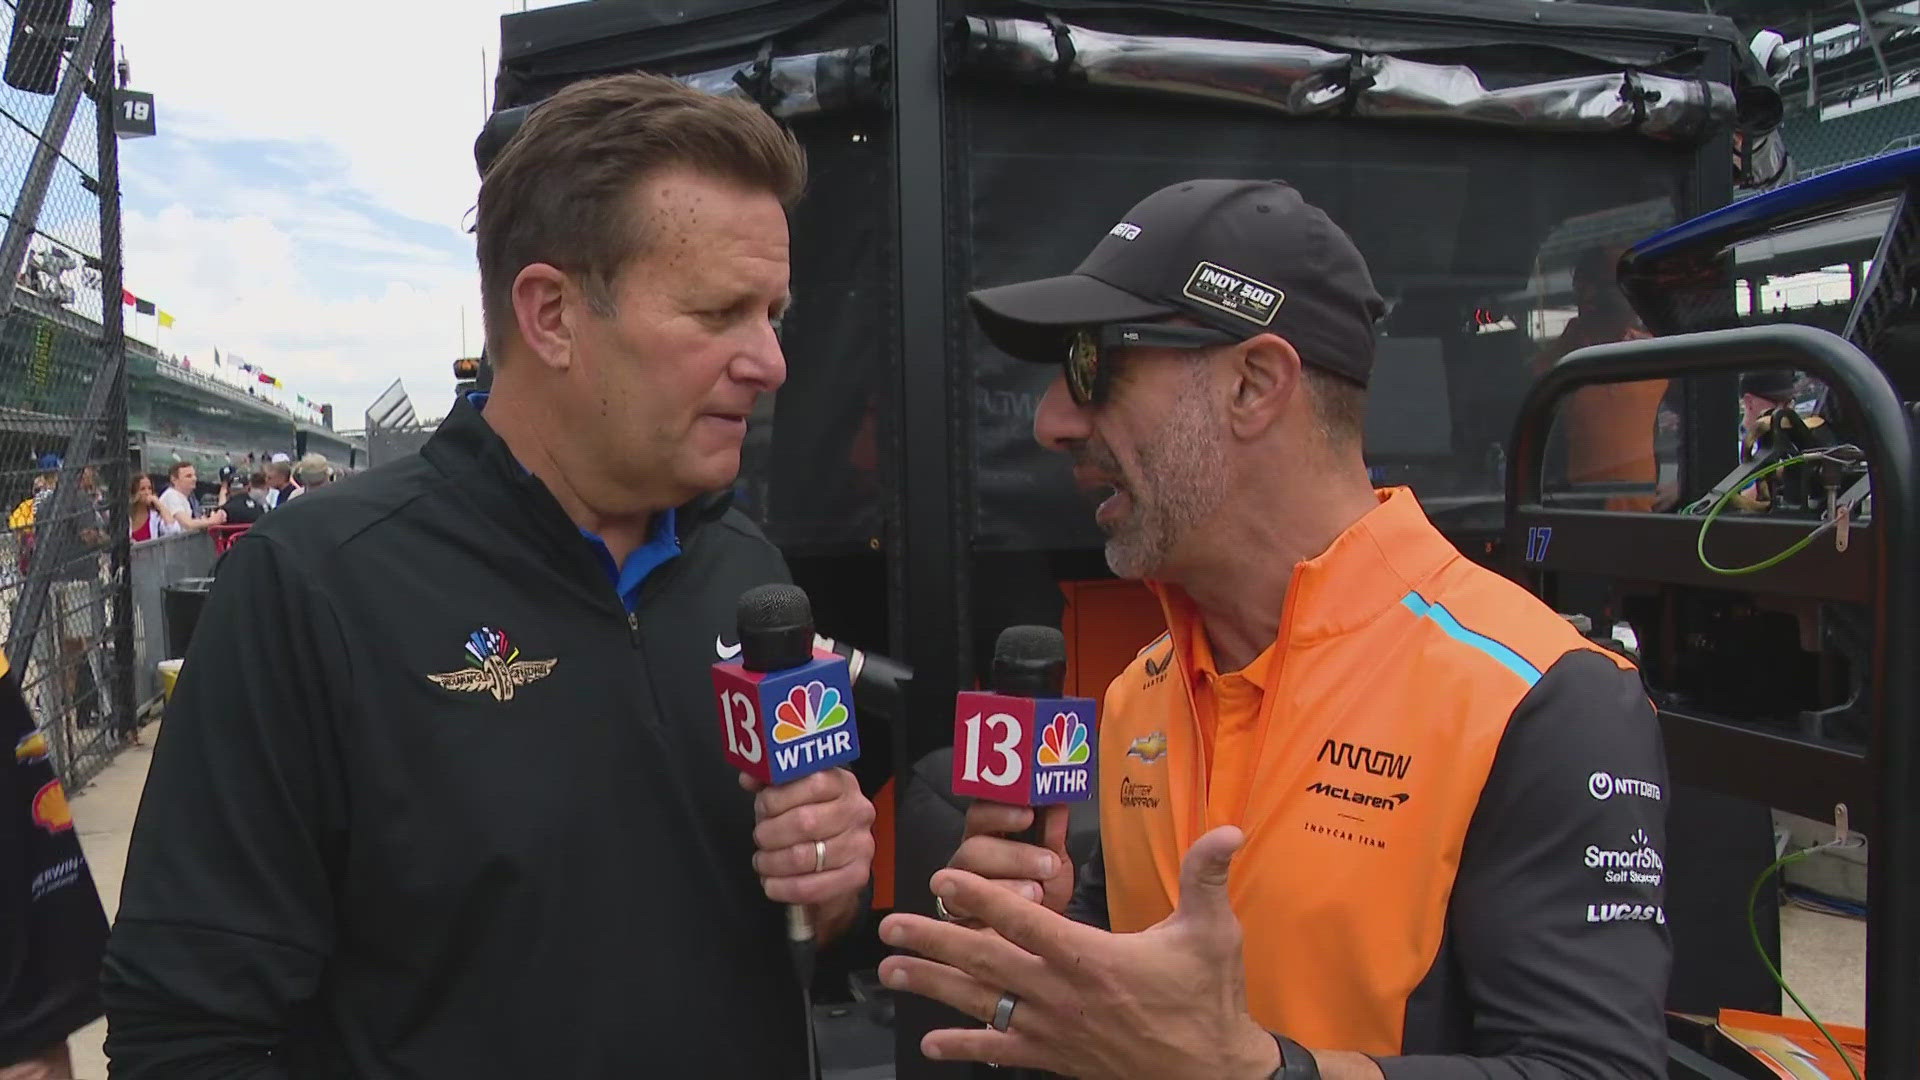 13Sports director Dave Calabro and 2013 Indy 500 winner/2004 IRL champion Tony Kanaan break down the second day of practice for the 2024 Indianapolis 500.